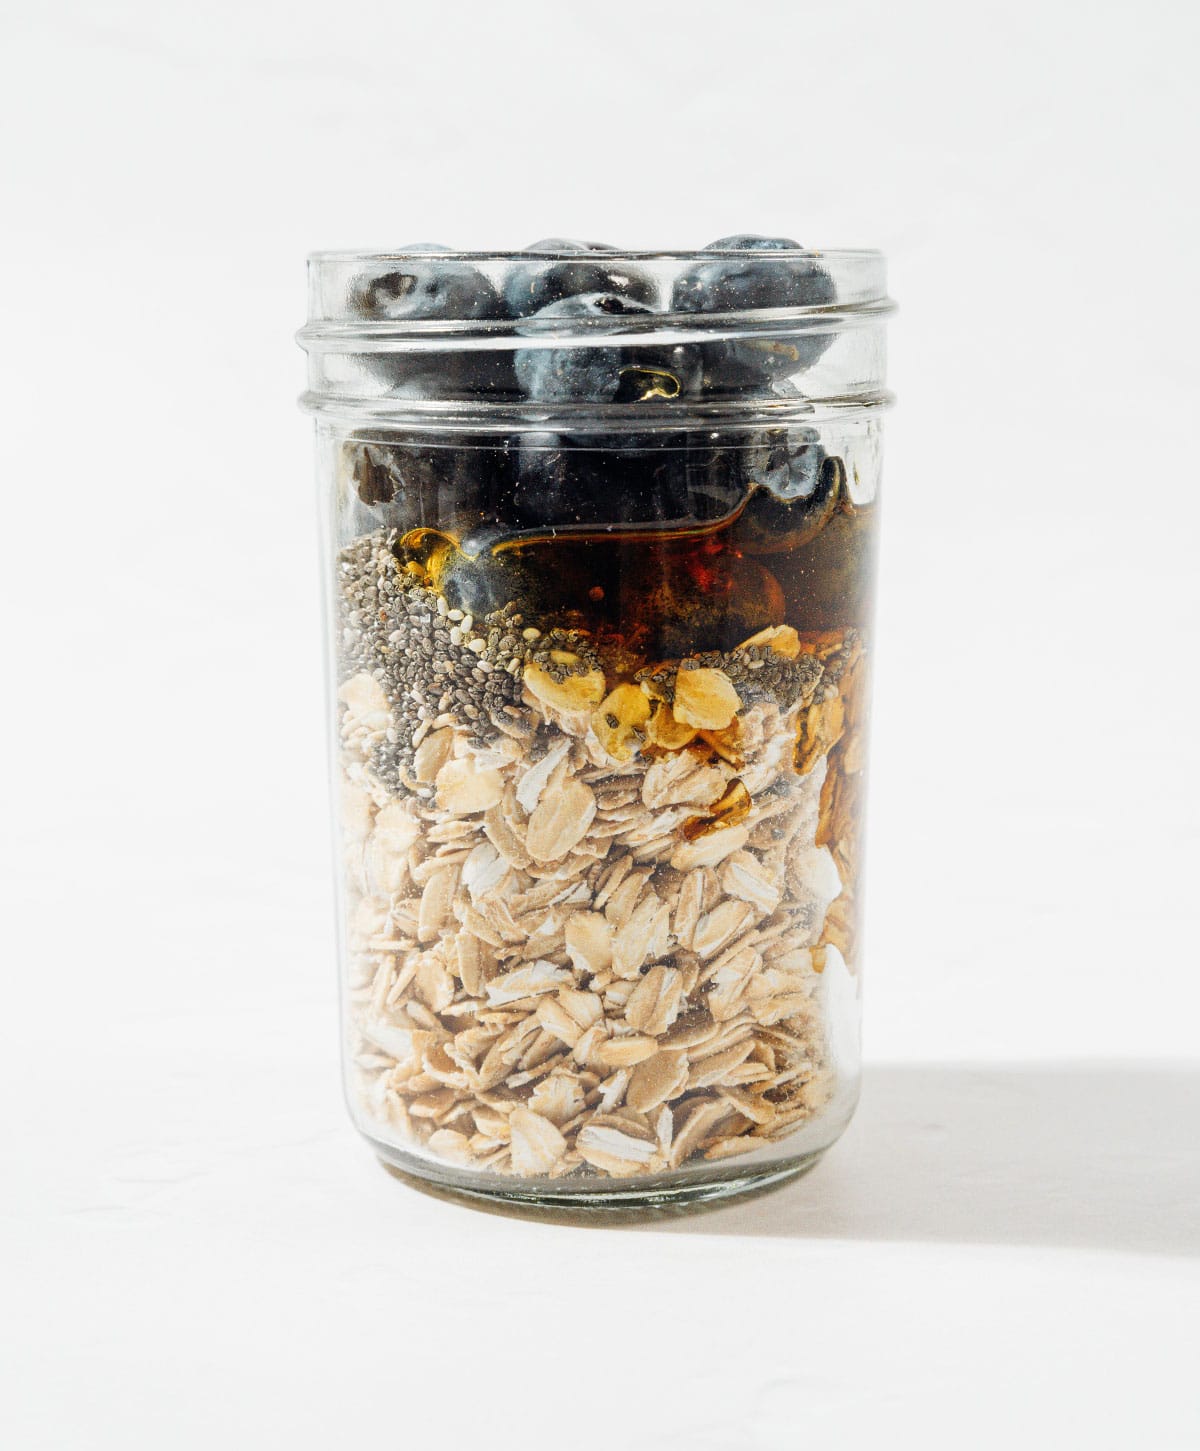 Ingredients for blueberry overnight oats in a jar.